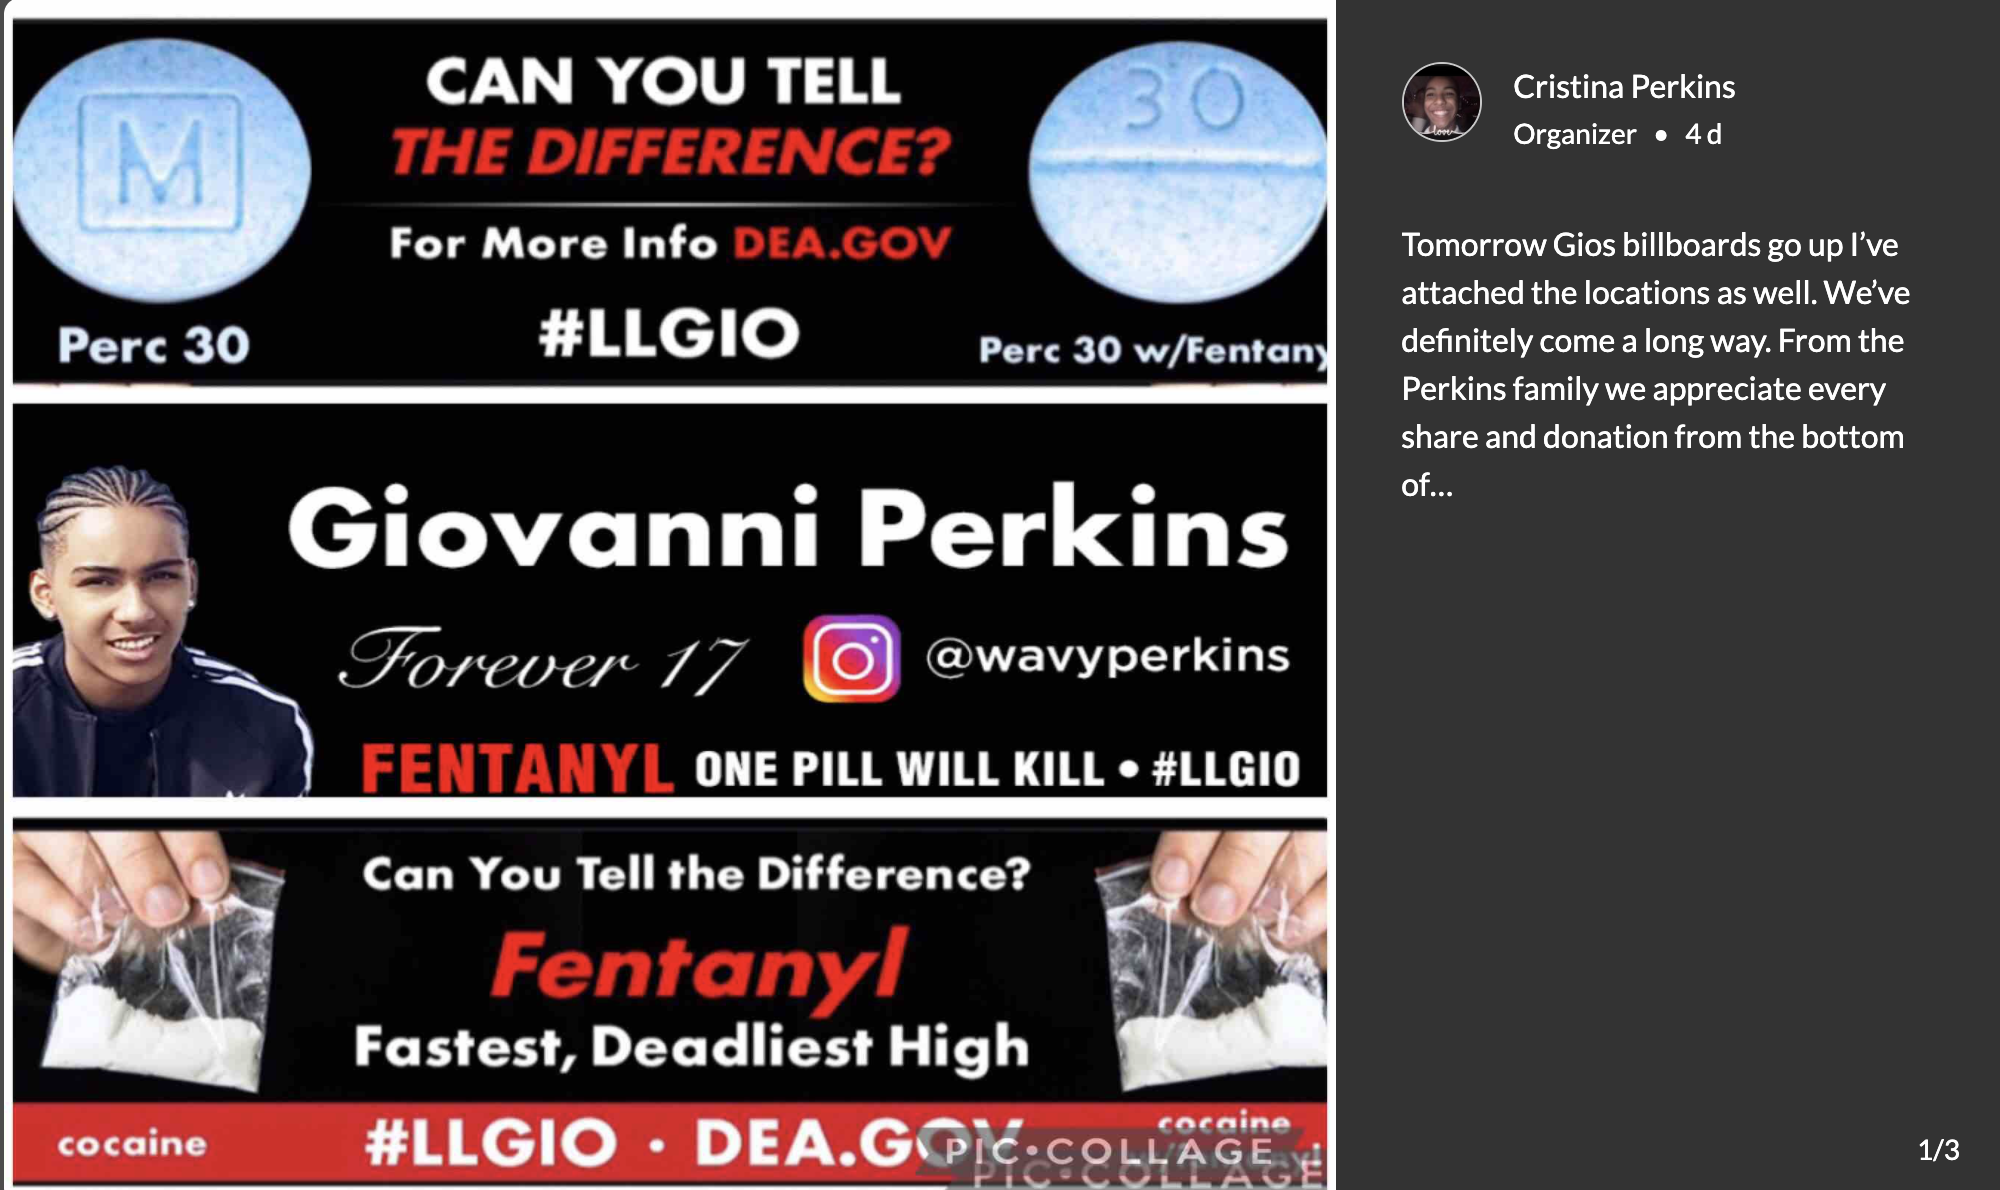 In October 2021, Gio Perkins' family erected ten billboards to warn Las Vegas residents about the threat of the counterfeit pills that killed him. (Image: <a href="https://www.gofundme.com/f/gios-world-awareness-project/update/29064633/gallery/0">GoFundMe</a>